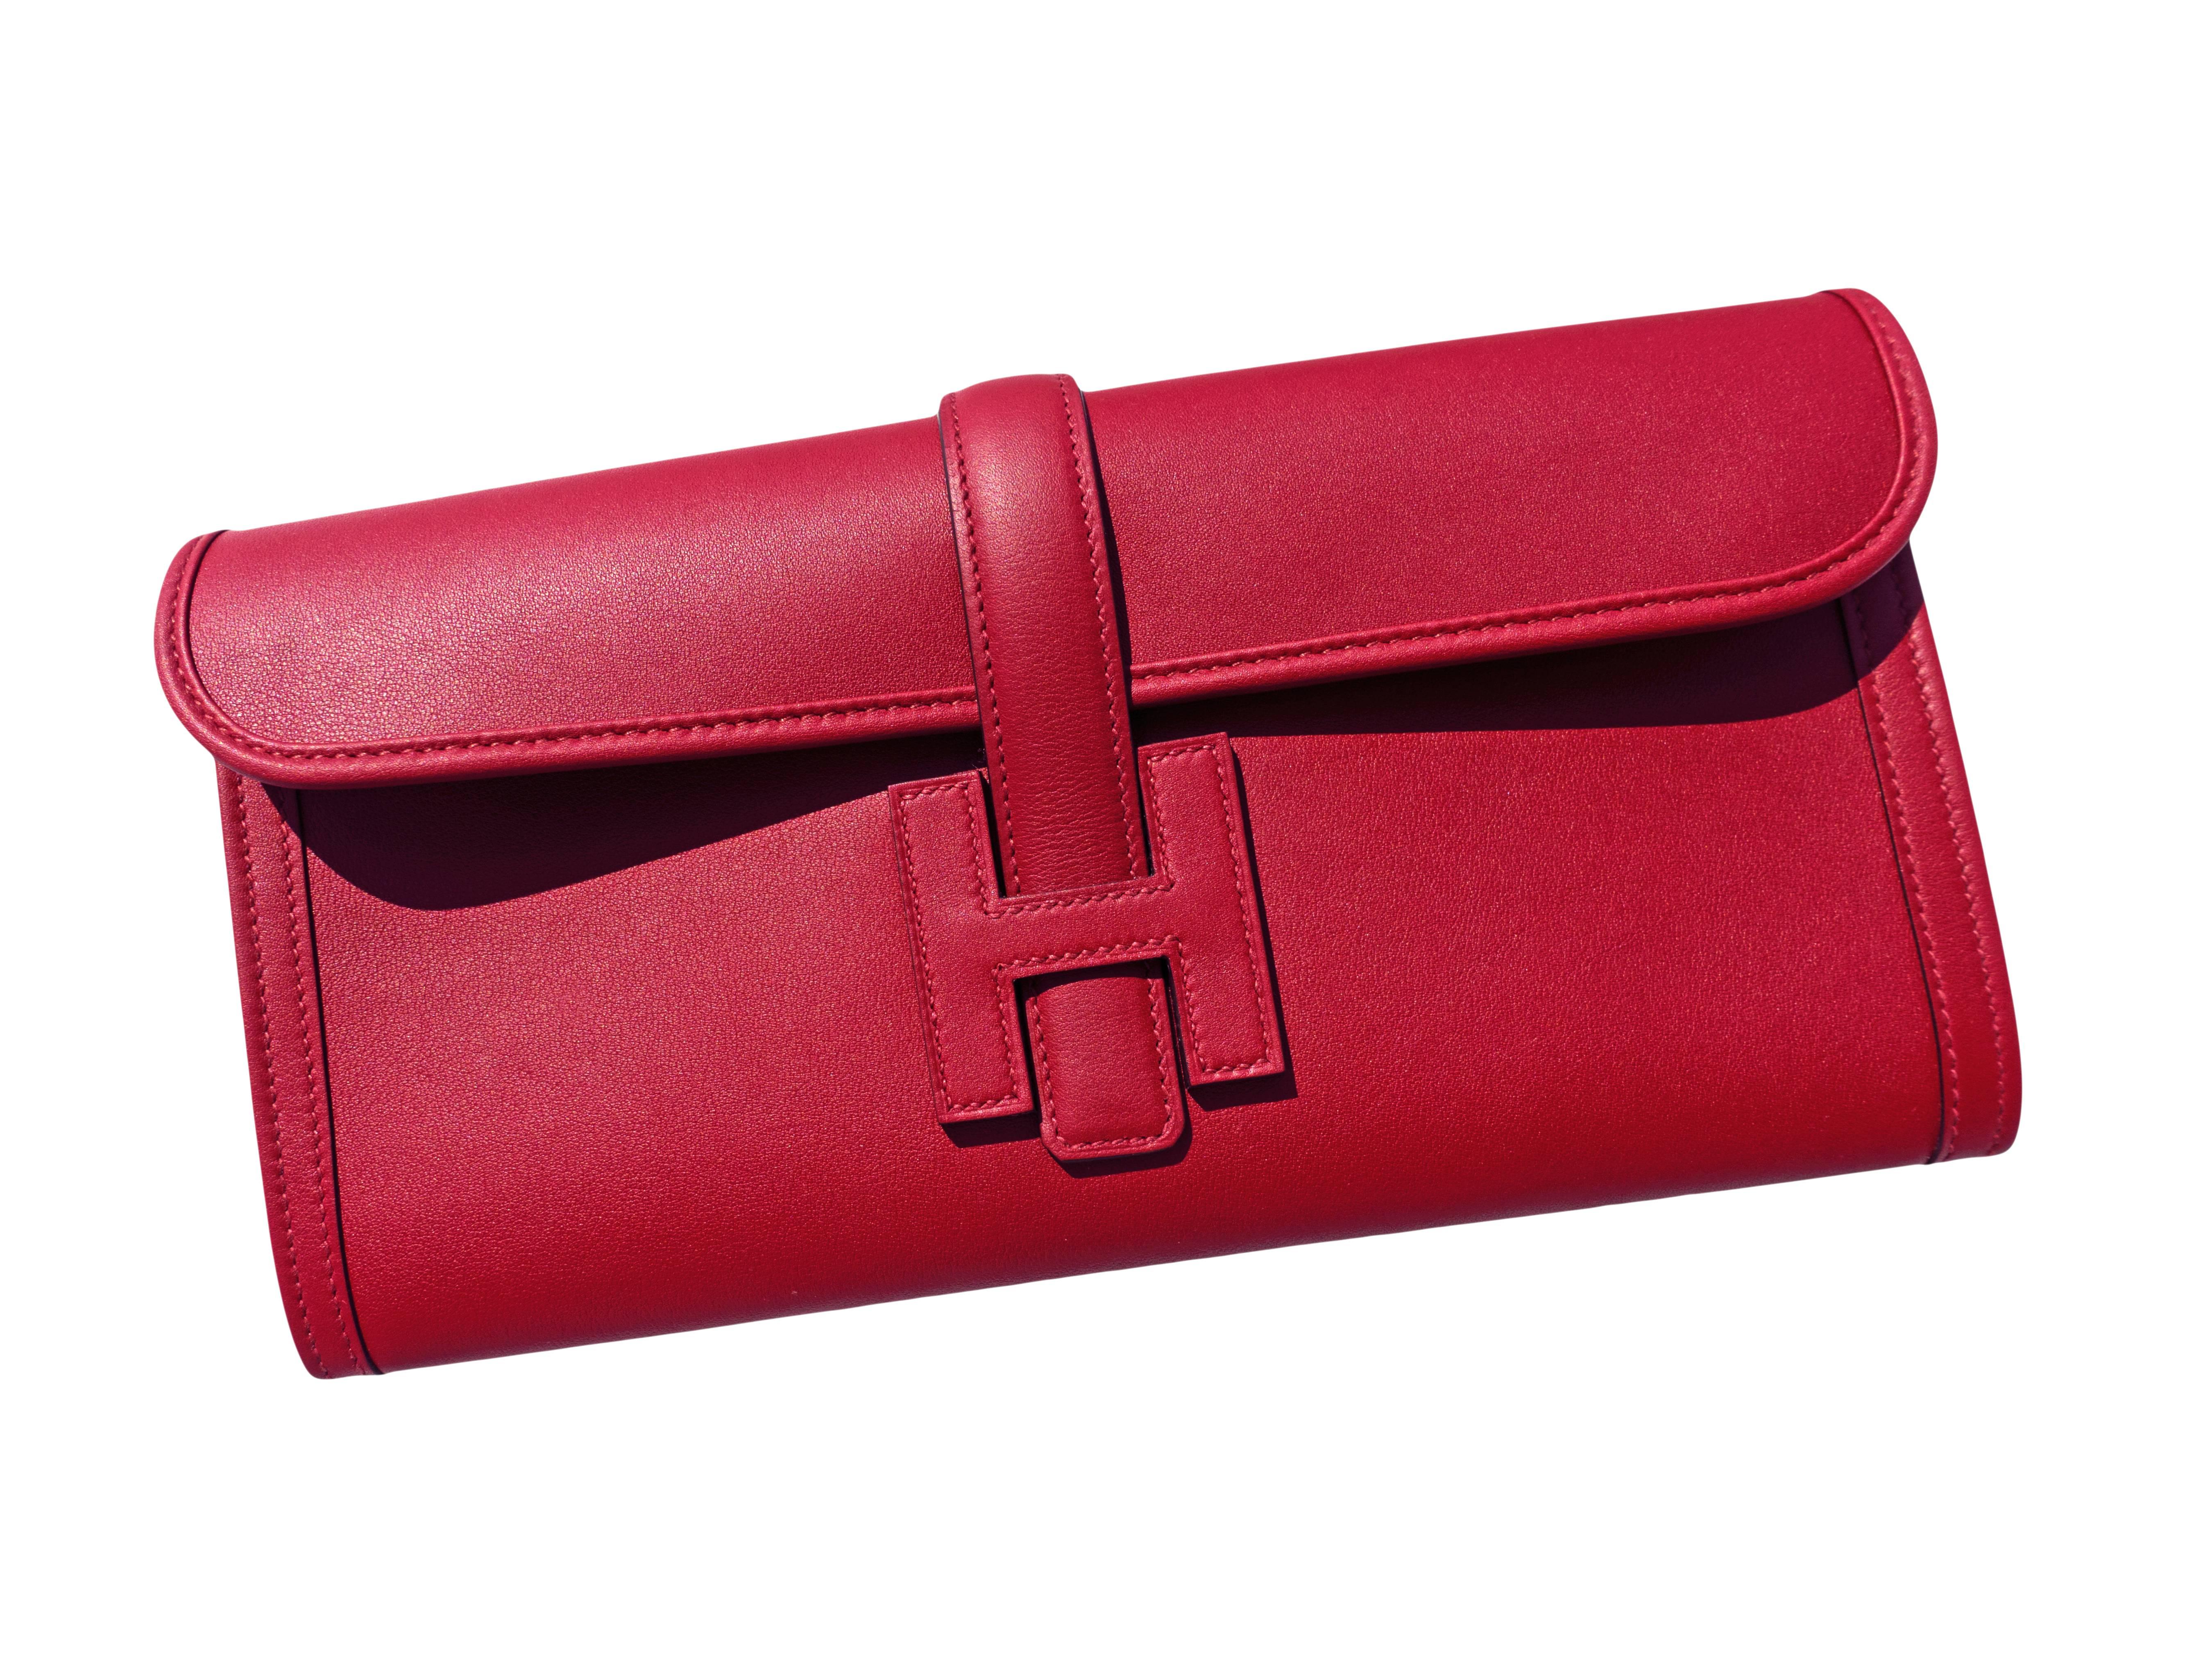 Hermes Rouge Grenat Jige Elan Clutch 29cm Red Garnet Jewel
Perfect Gift!  Brand New in Box.
2016 store fresh bag with interior X stamp.
Comes in full set with Hermes dust bag and Hermes box.
The latest color Rouge Grenat is a must-have 